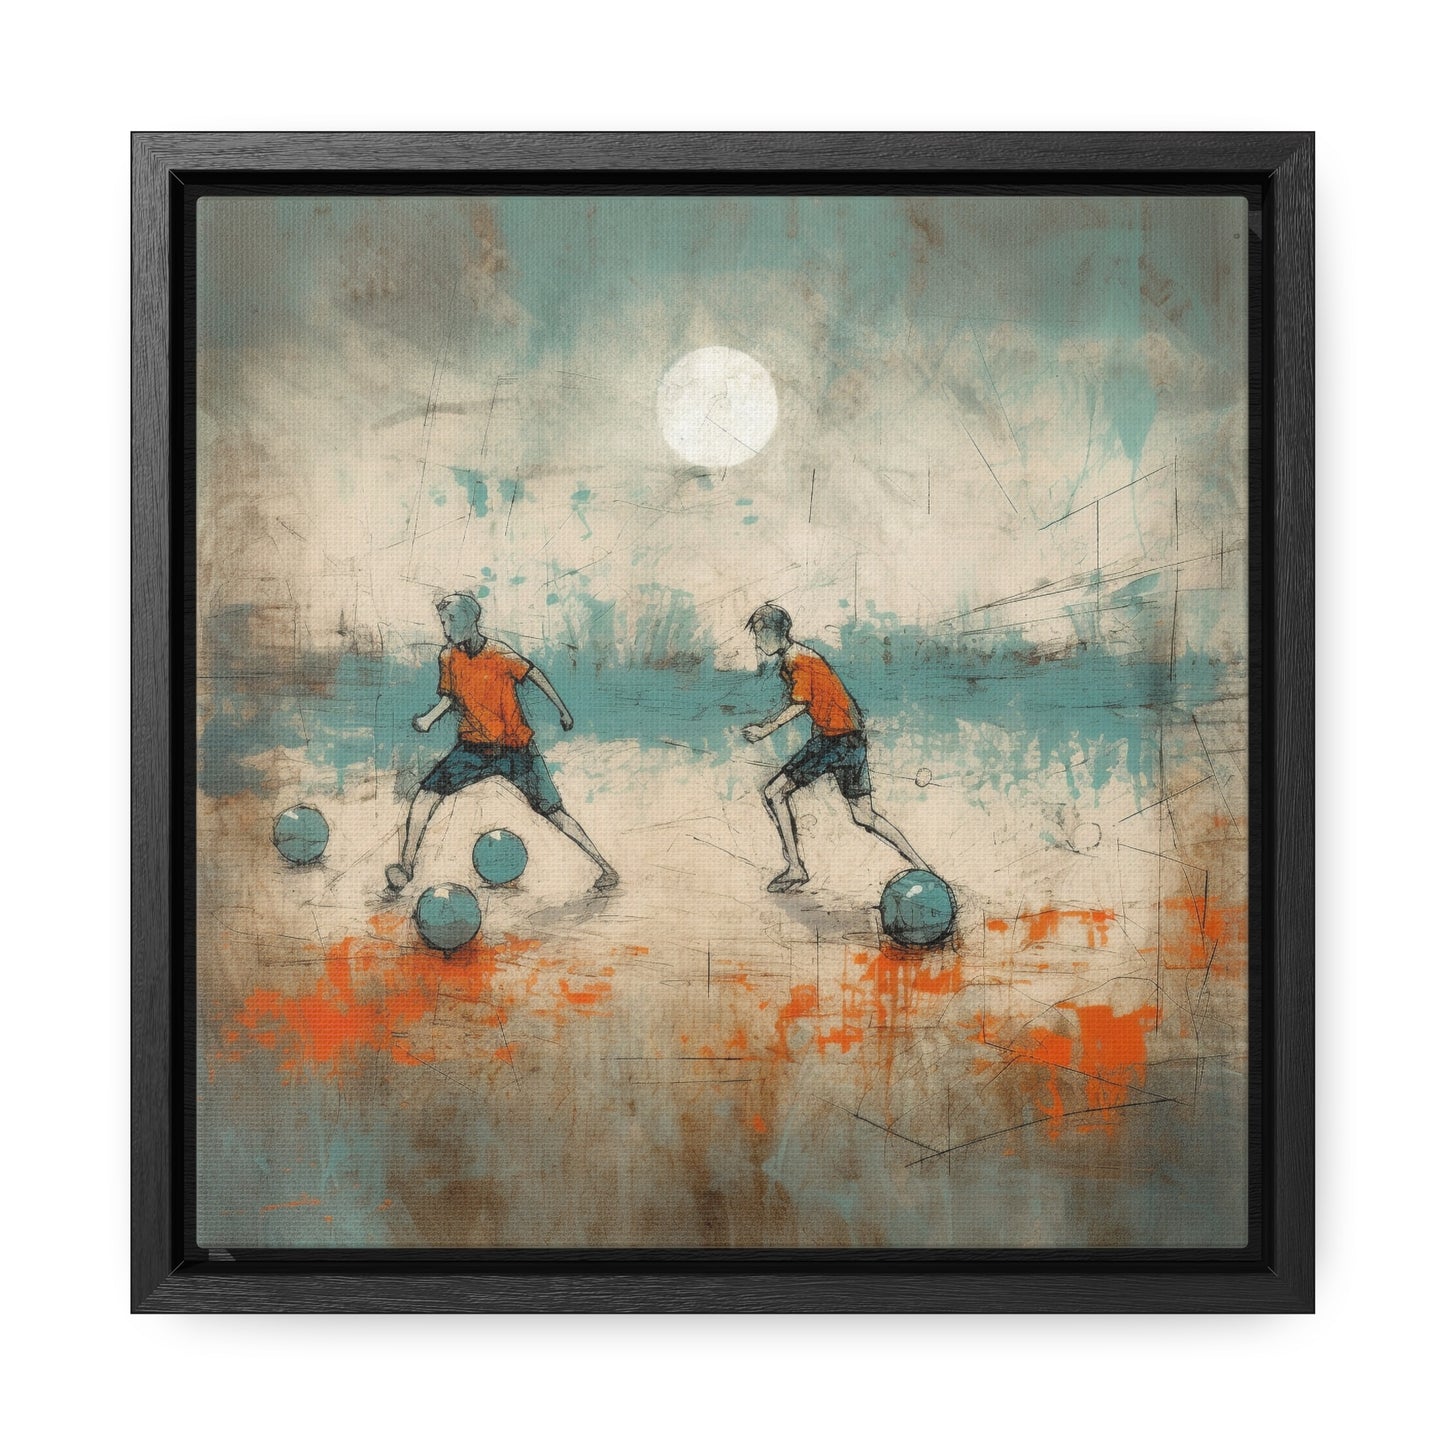 Childhood 39, Gallery Canvas Wraps, Square Frame